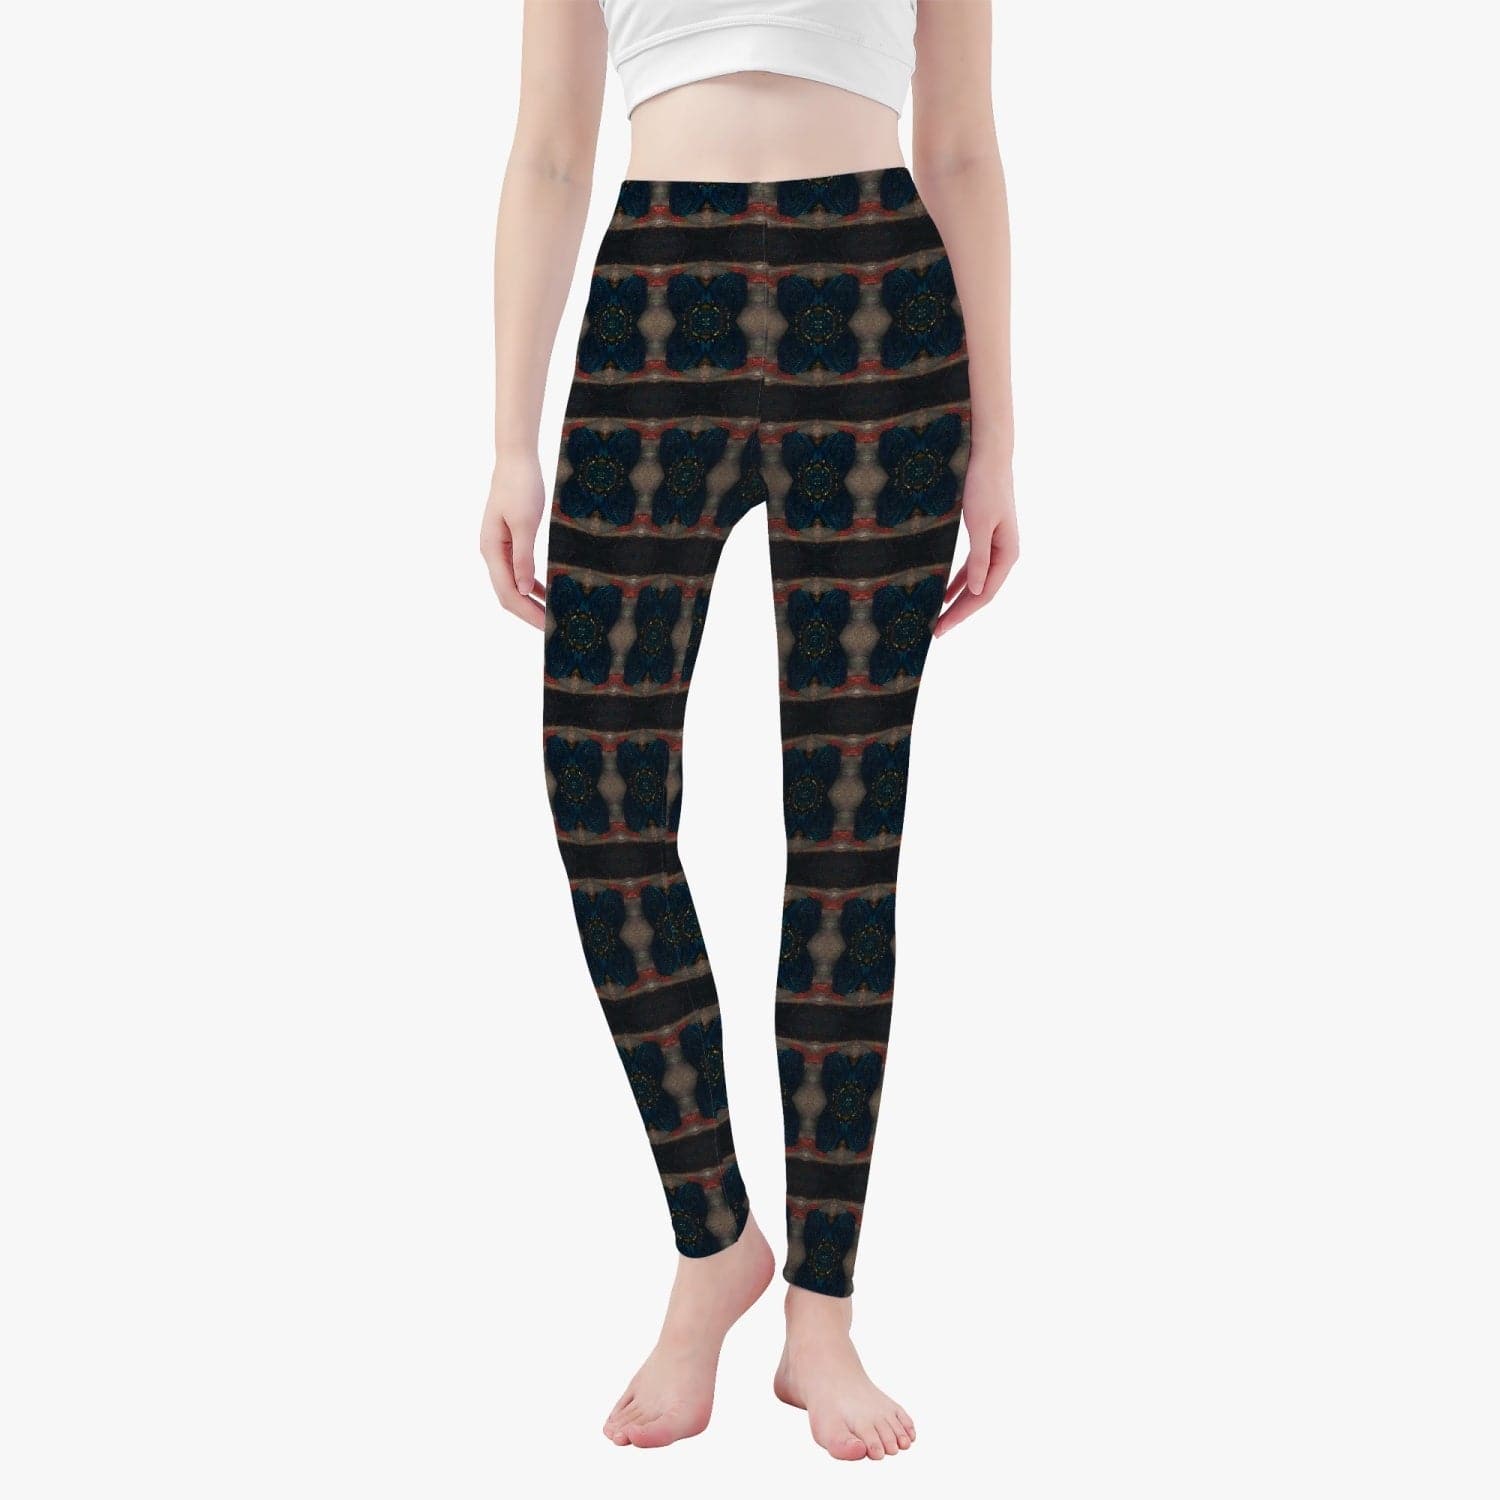 Building the Pillars Black with Subtle Red and Gold Patterned. Yoga Pants/Leggings for Women, by Sensus Studio Design